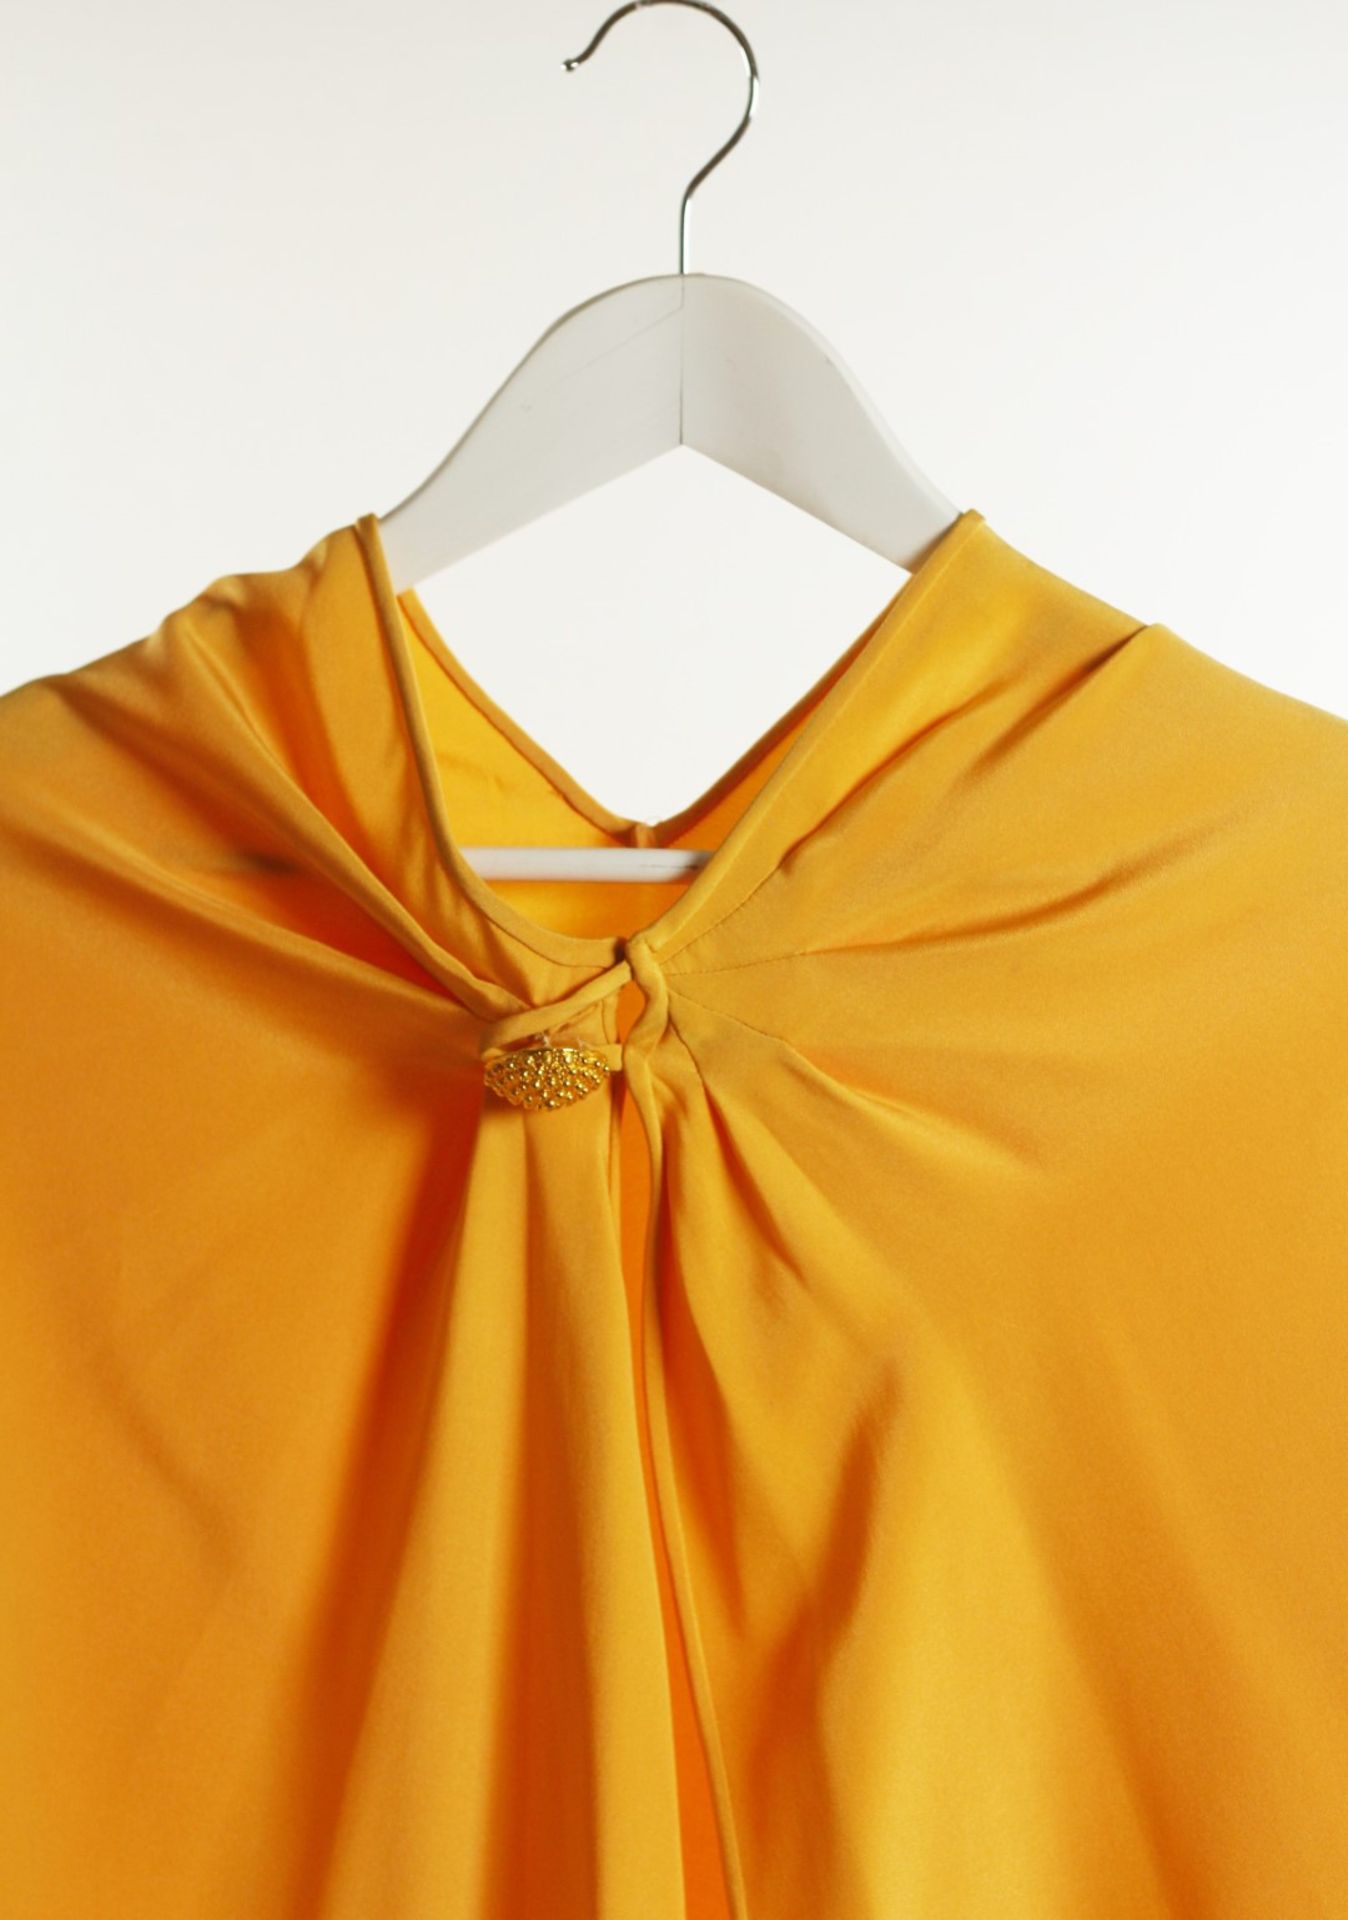 1 x Boutique Le Duc Apricot Wrap/Shawl - From a High End Clothing Boutique In The - Image 4 of 8